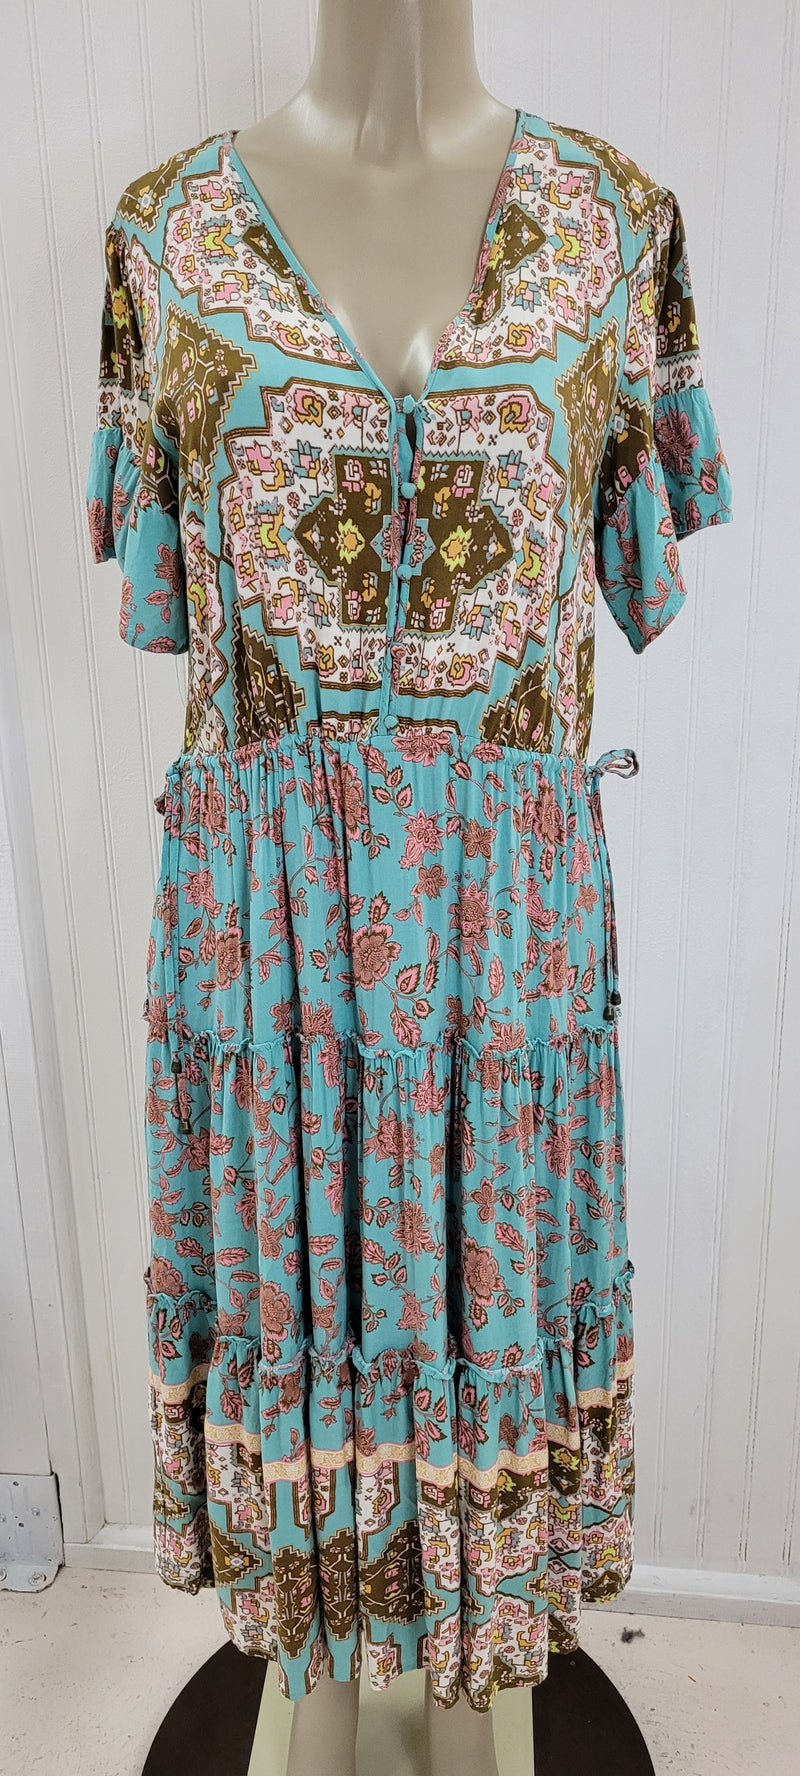 Size M matilda jane turquoise and brown Dress